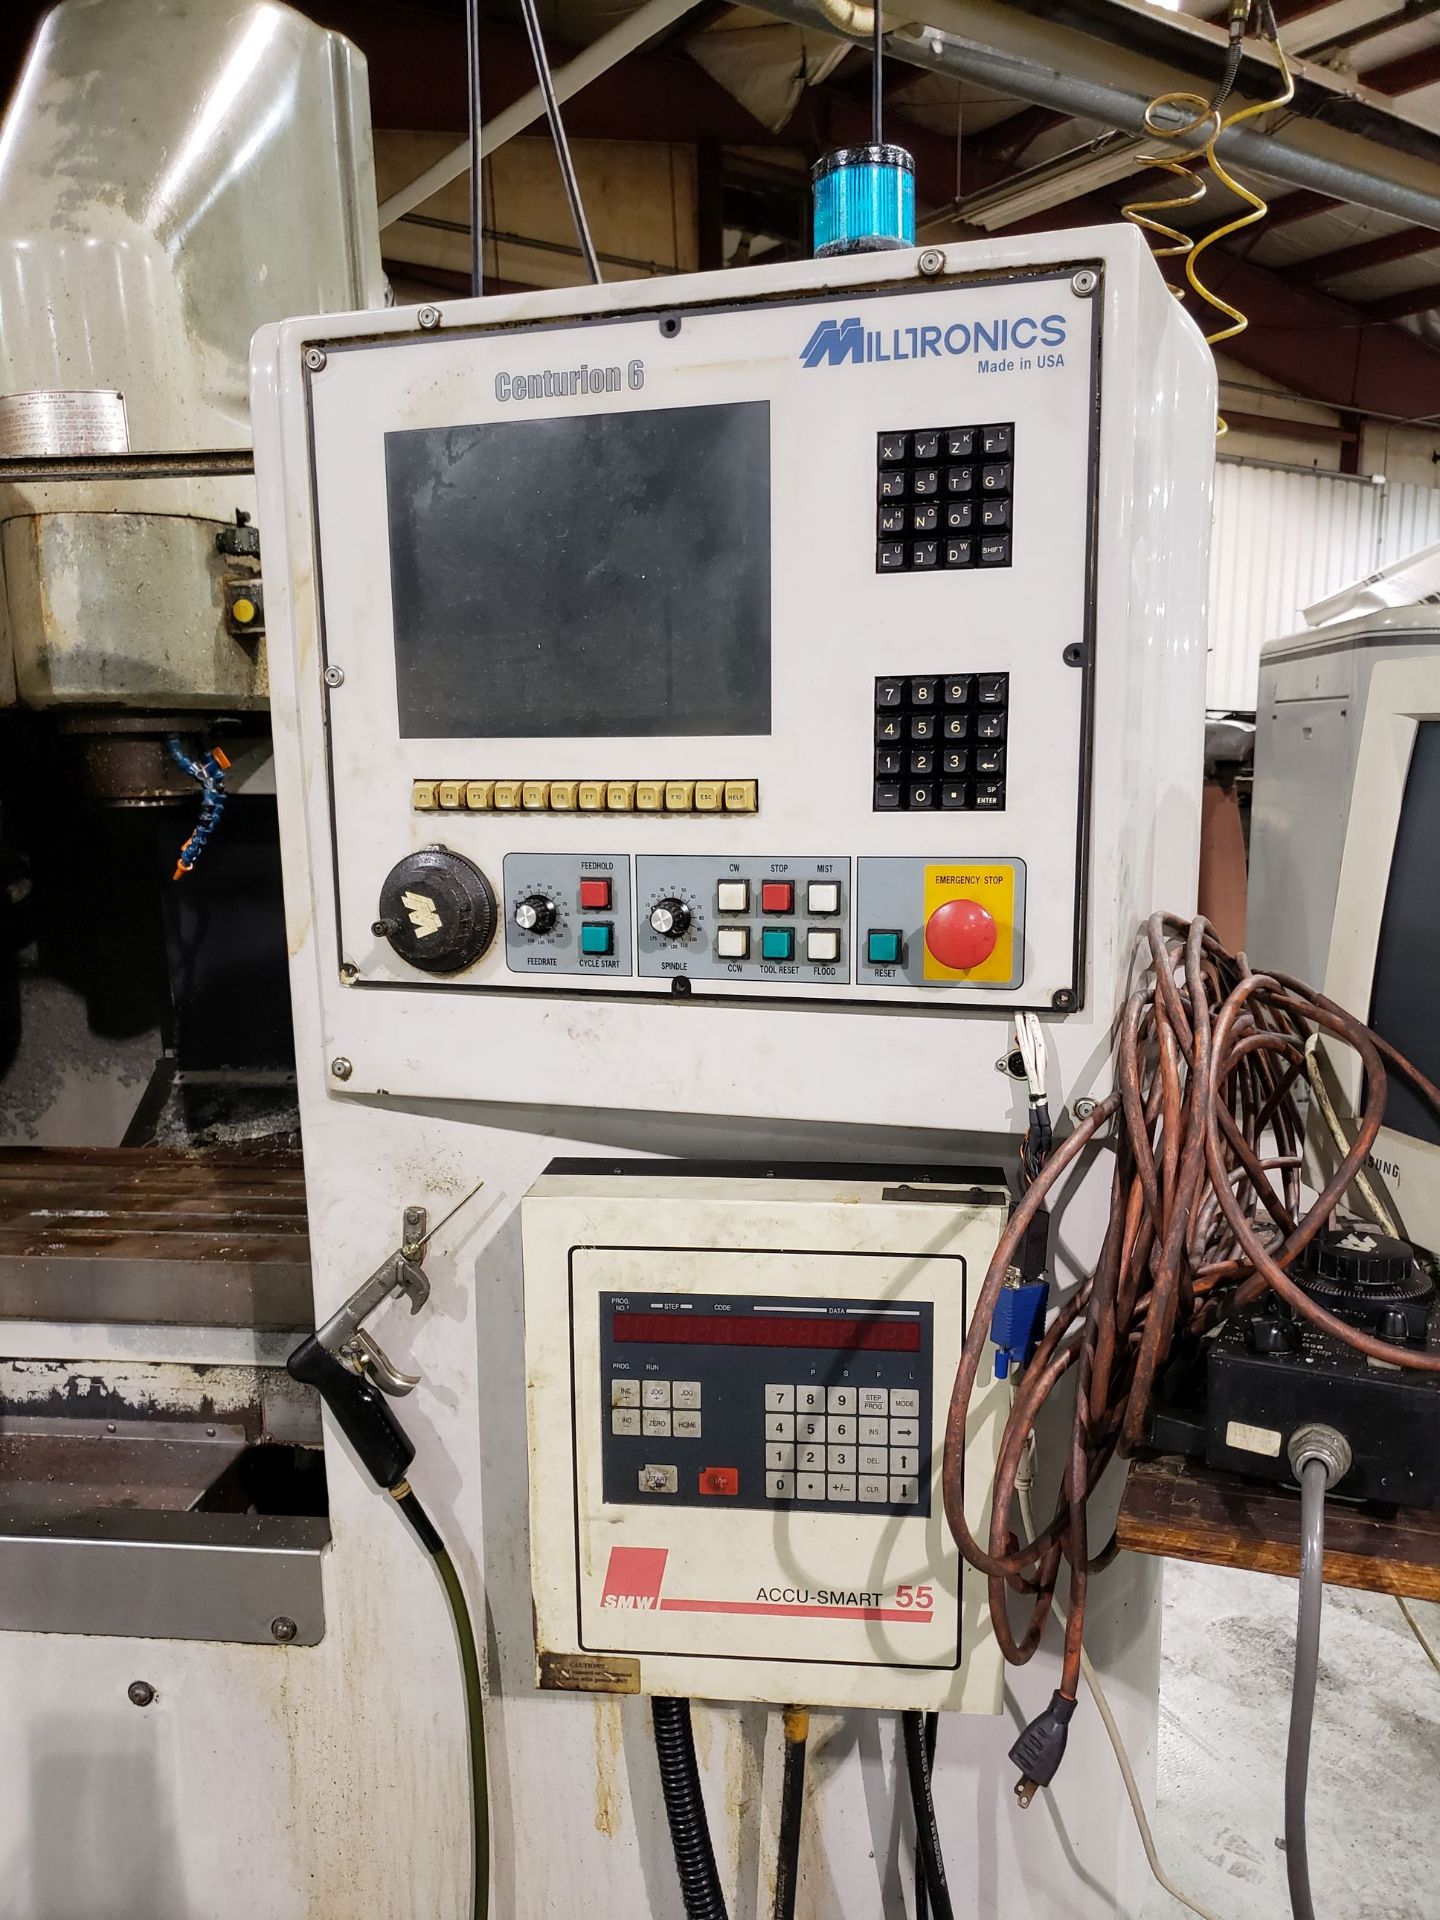 MILLTRONICS VM 15 SN 6141, TRAVELS- X- 24", Y-15", Z-19.5", 6000 RPM SPINDLE SPEED, 20 ATC, 16X40 - Image 2 of 7